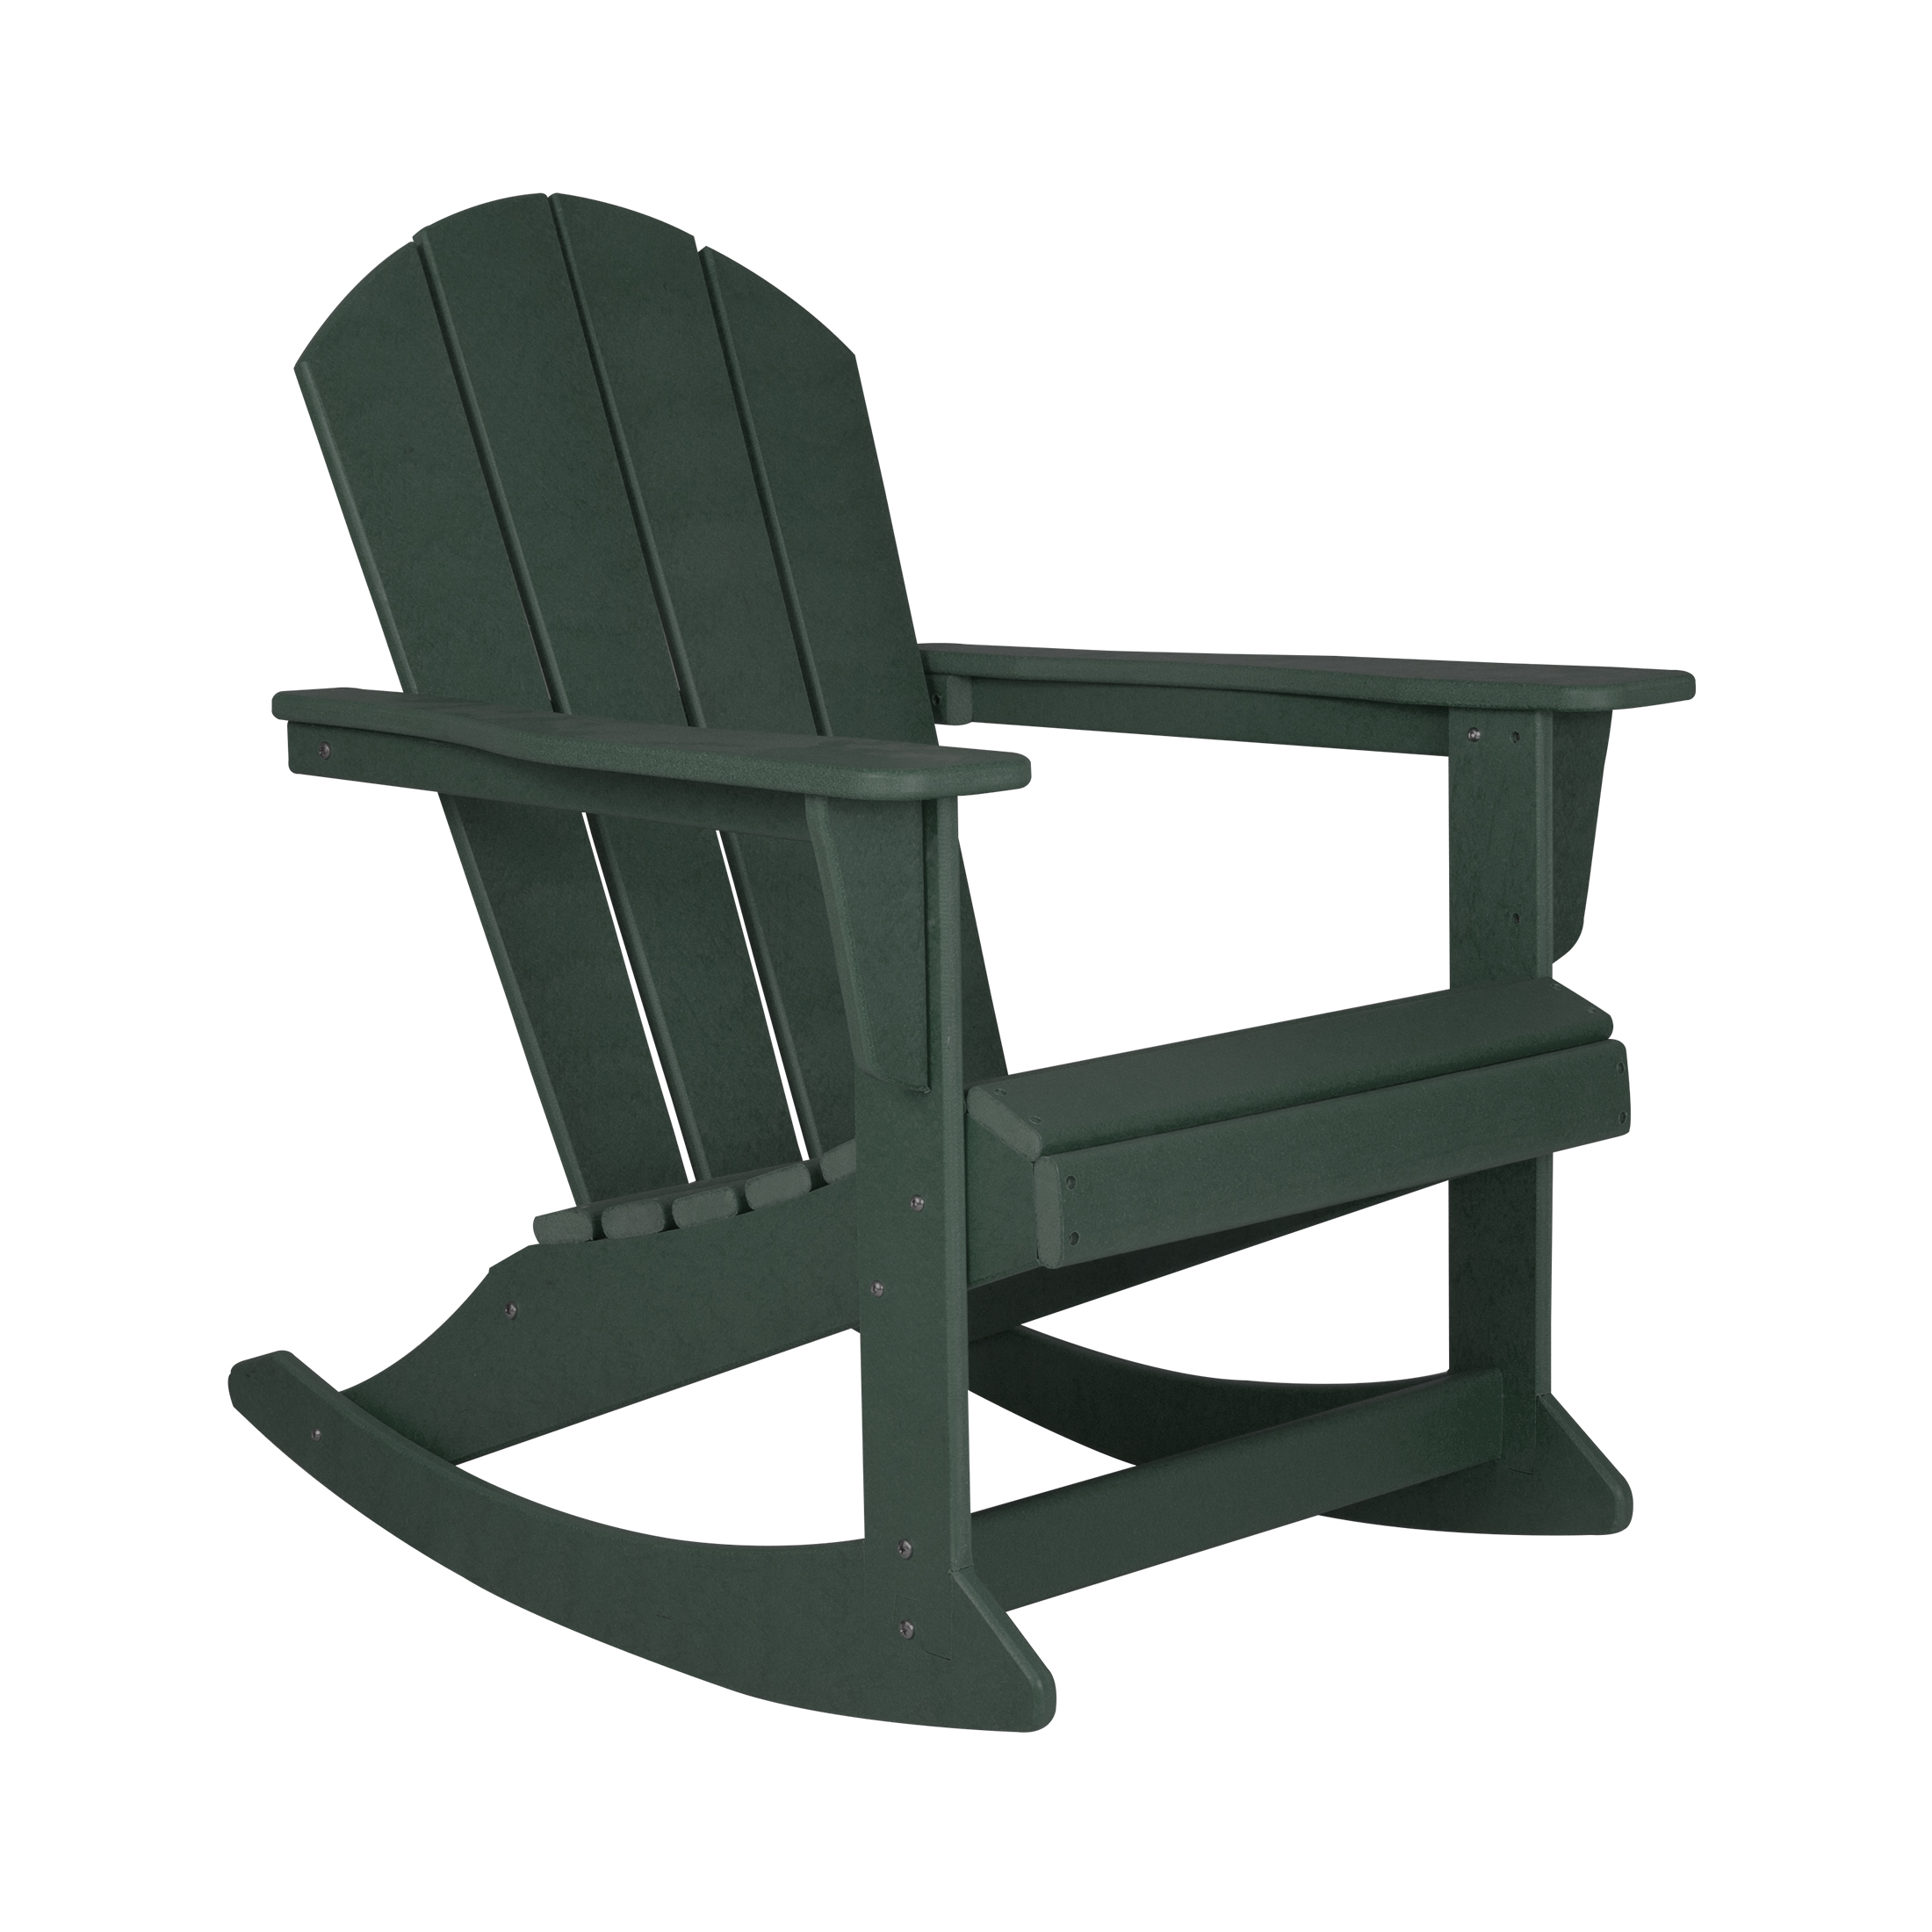 GARDEN Plastic Adirondack Rocking Chair for Outdoor Patio Porch Seating, Dark Green - image 2 of 7